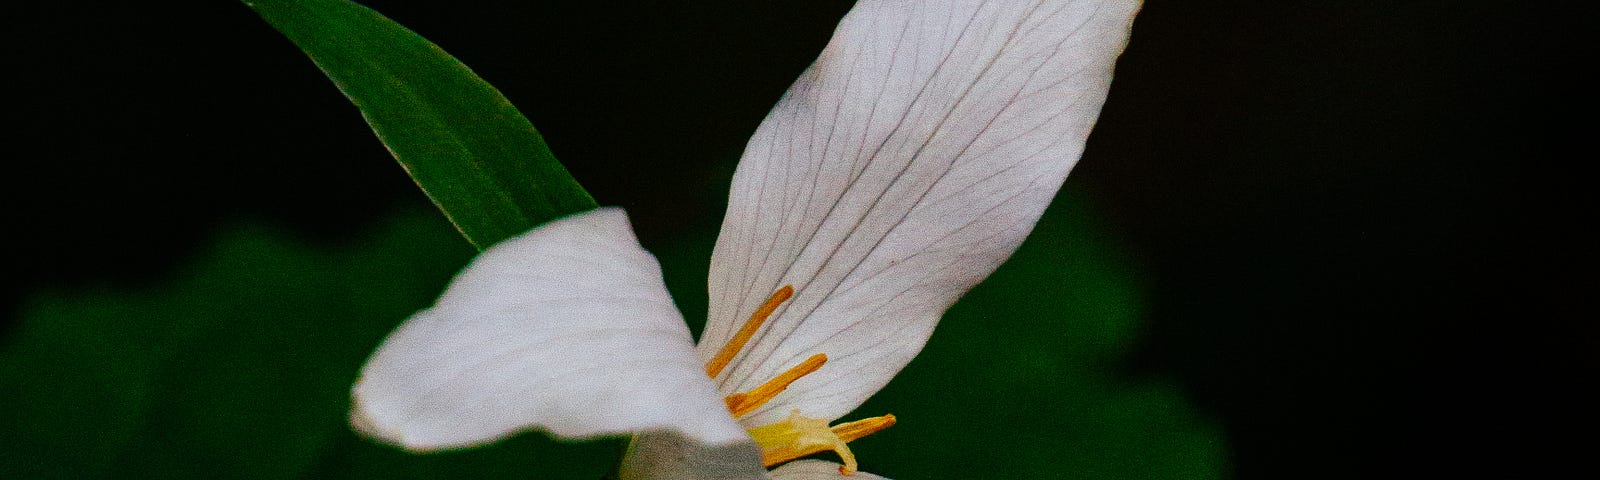 A trillium, an endangers species and the floral emblem of Ontario